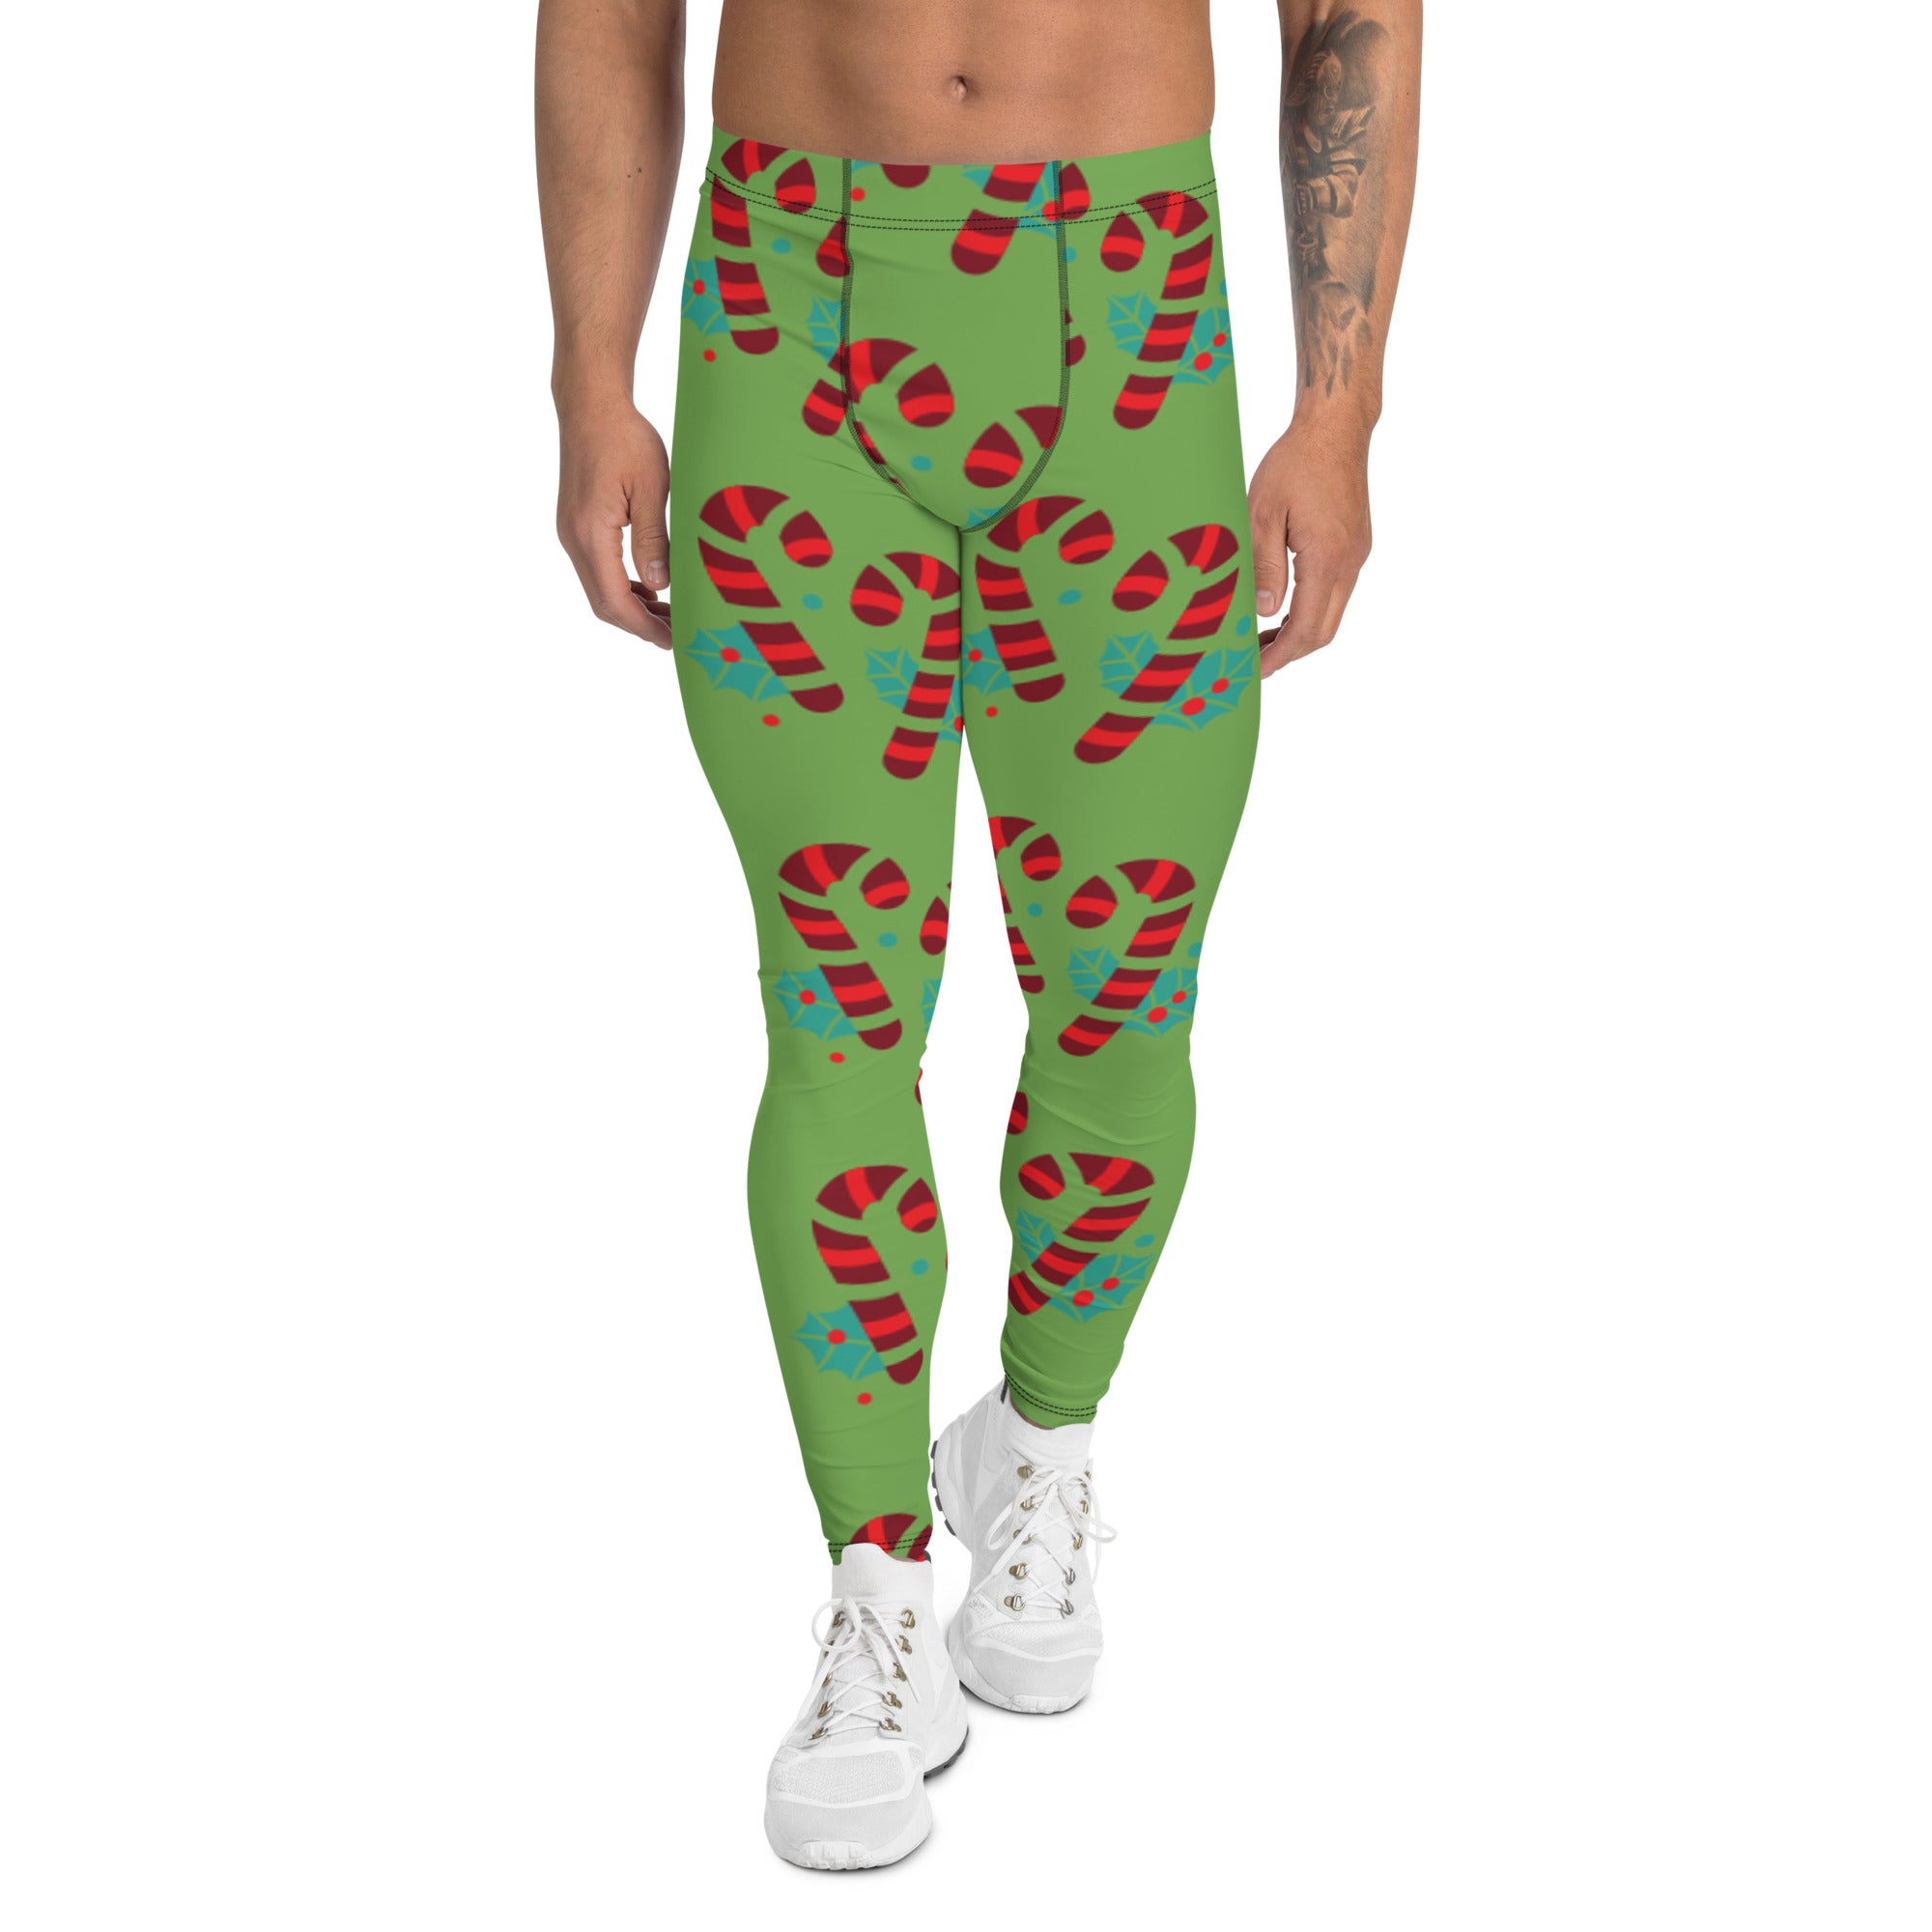 Blue Candy Cane Men's Leggings, Blue and Red Colorful Christmas Candy Cane Men's tights, Best Designer Christmas Candy Cane Print Sexy Meggings Men's Workout Gym Tights Leggings, Men's Compression Tights Pants - Made in USA/ EU/ MX (US Size: XS-3XL) Green Candy Cane Men's Leggings, Green and Red Colorful Christmas Candy Cane Men's tights, Best Designer Christmas Candy Cane Print Sexy Meggings Men's Workout Gym Tights Leggings, Men's Compression Tights Pants - Made in USA/ EU/ MX (US Size: XS-3XL) 